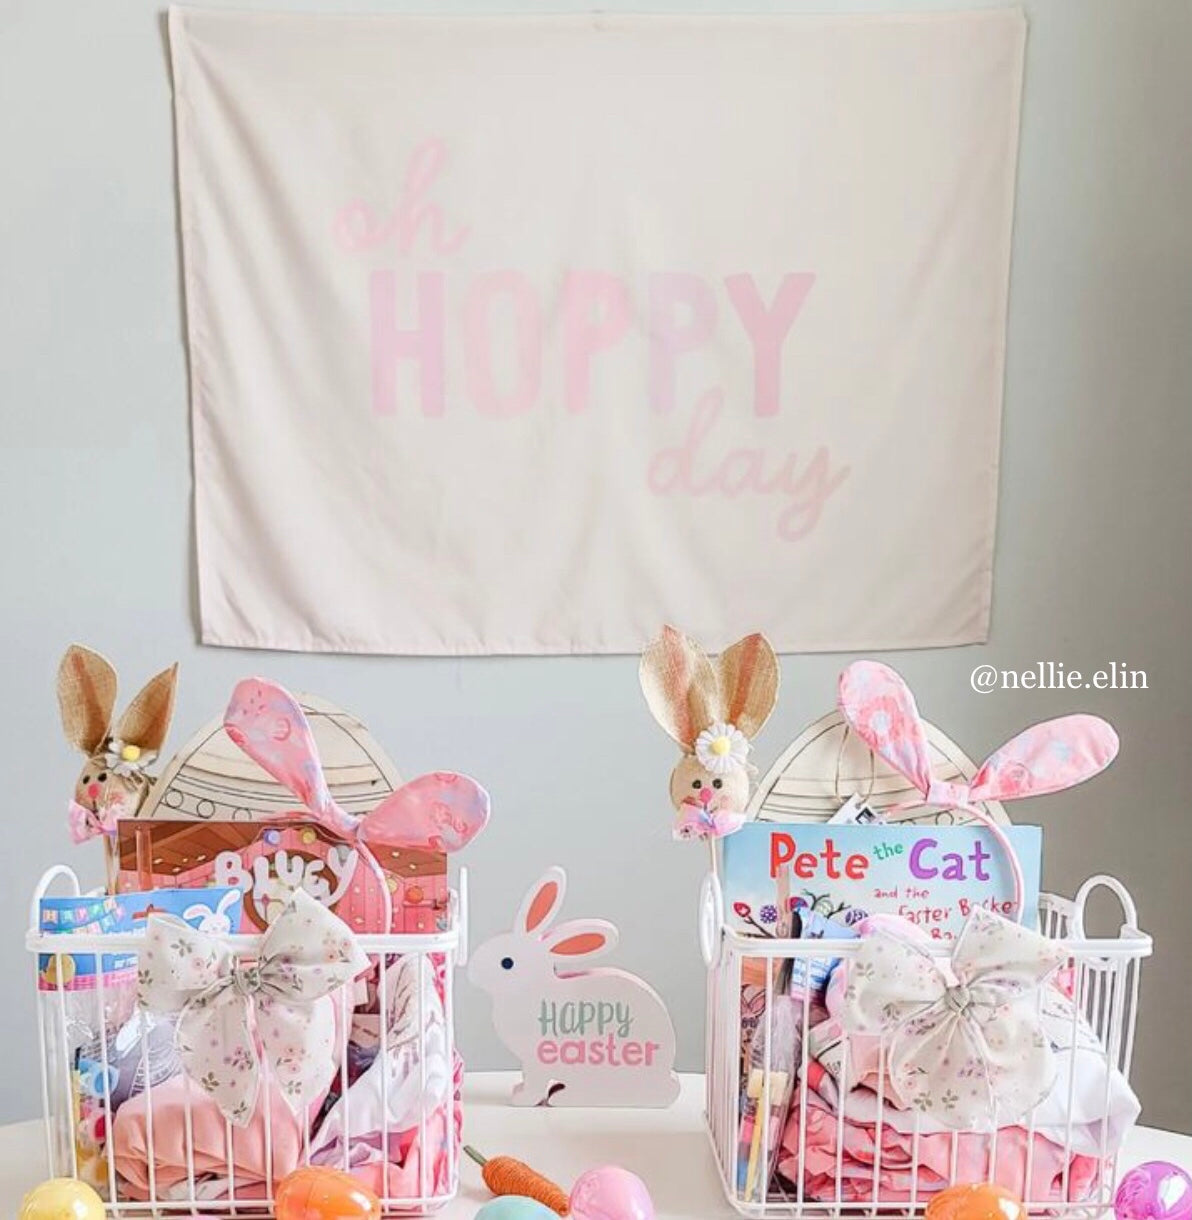 Pink Oh Hoppy Day Banner